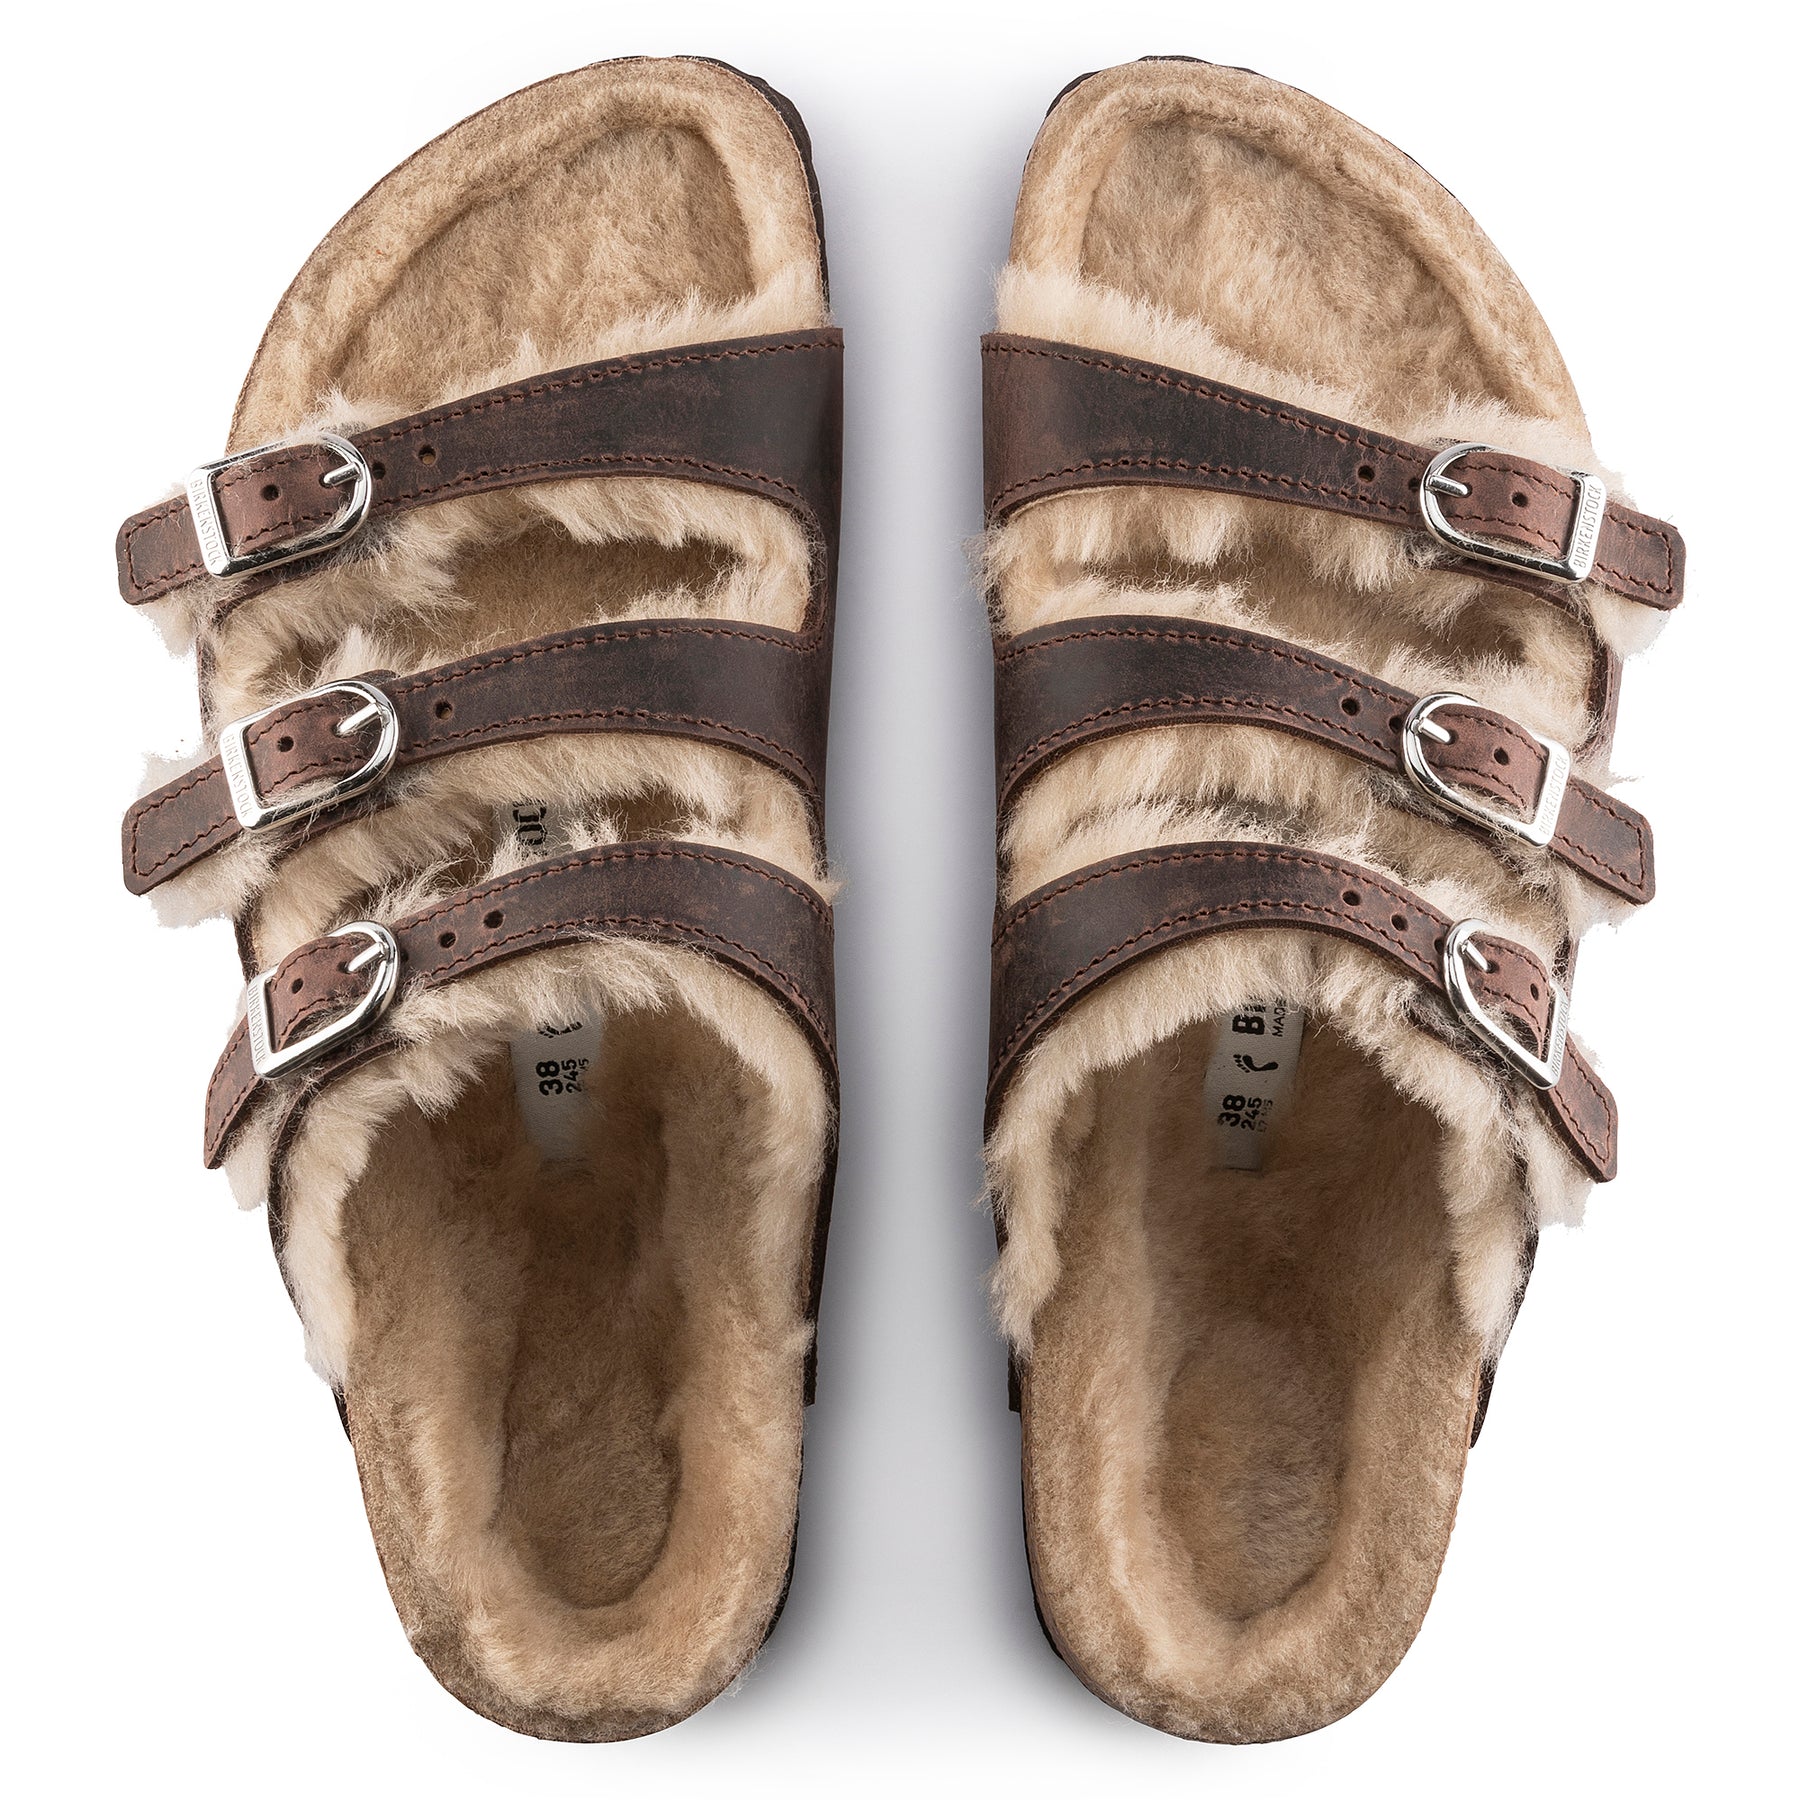 Birkenstock Limited Edition Florida habana oiled leather/natural shearling